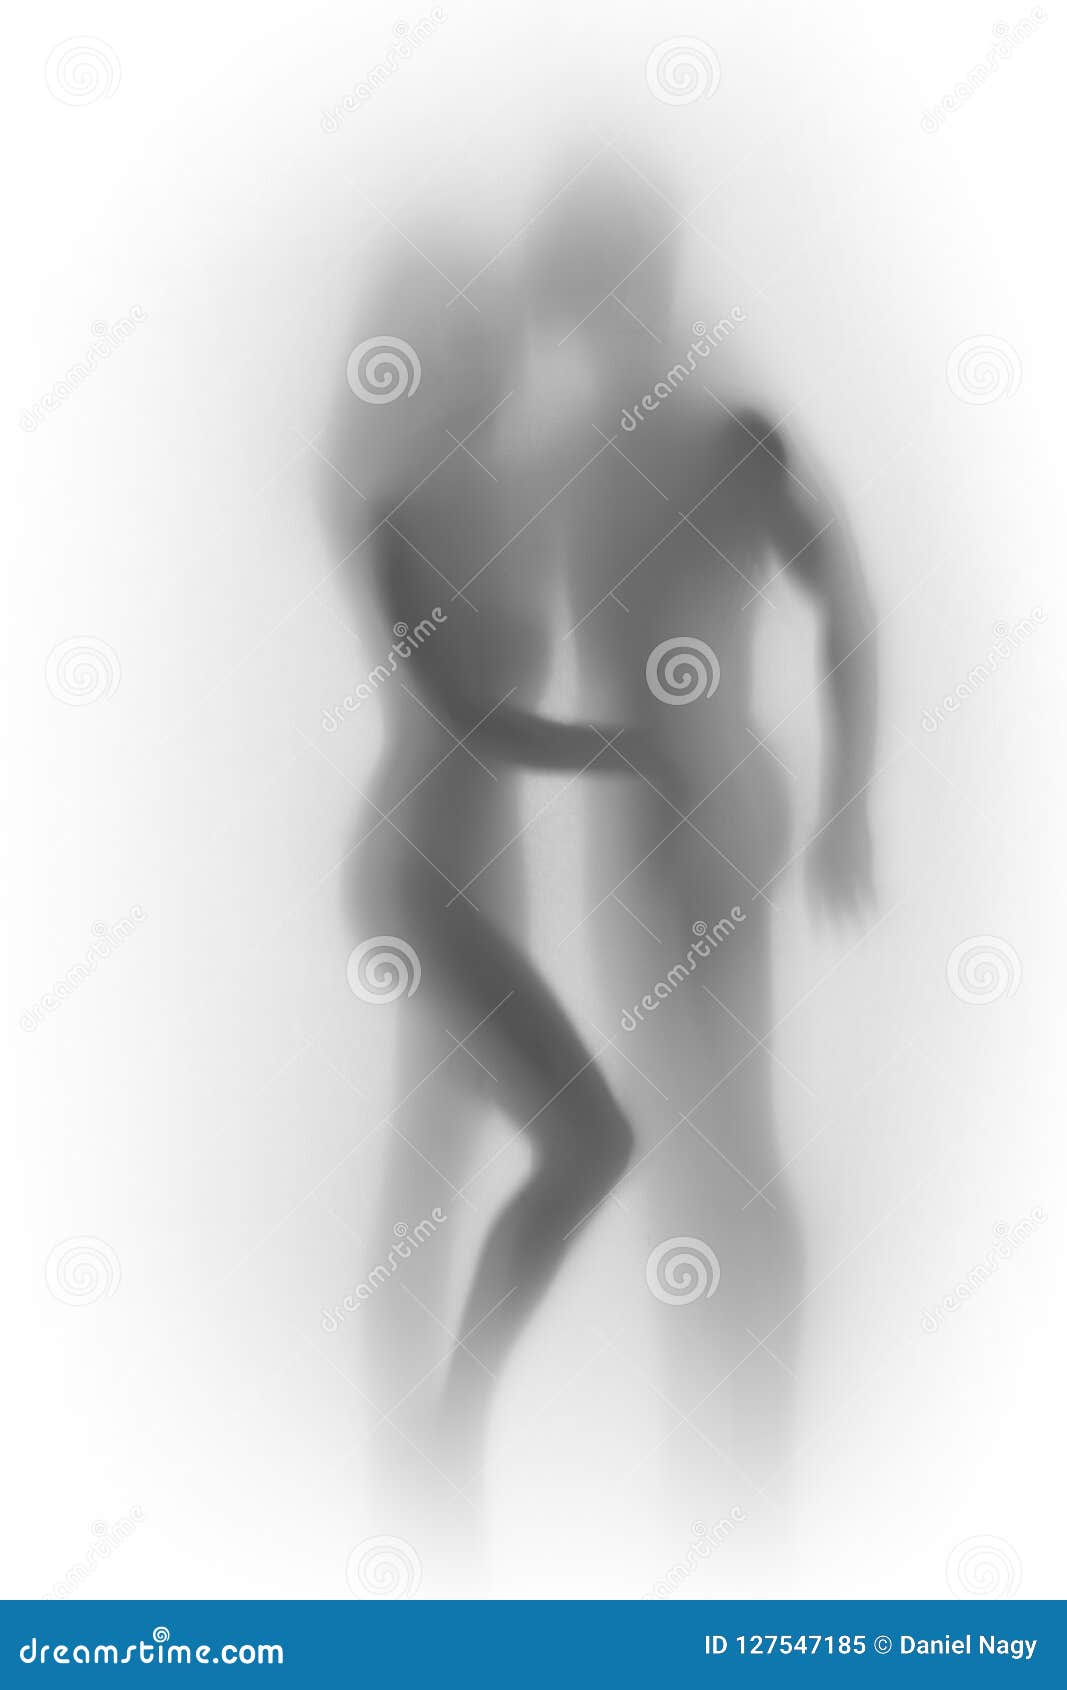 beautiful lover couple, woman and a male human body silhouette together.